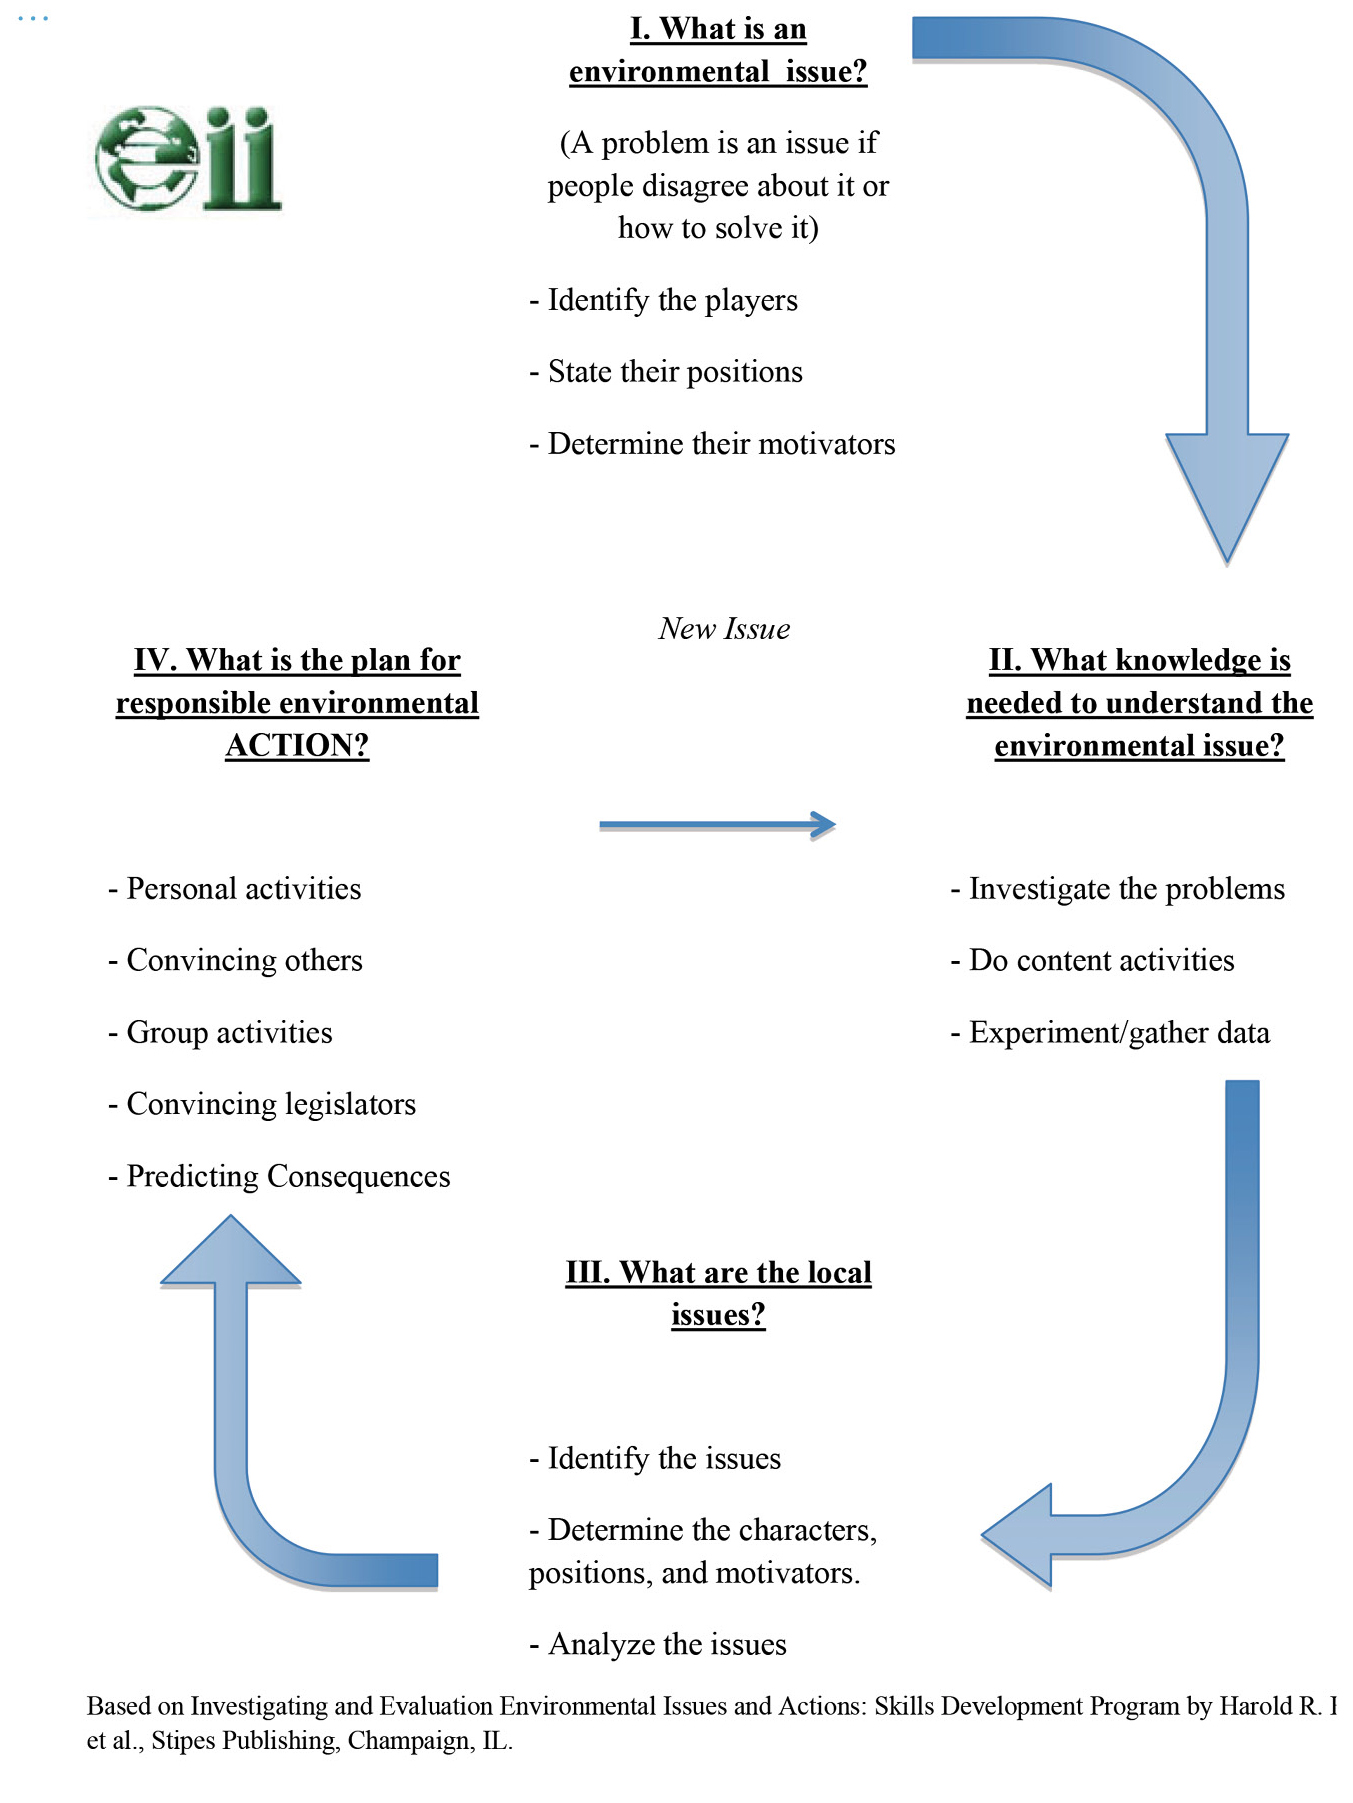 Figure 1 Environmental Issues Instructional (eii) model of issue investigation.